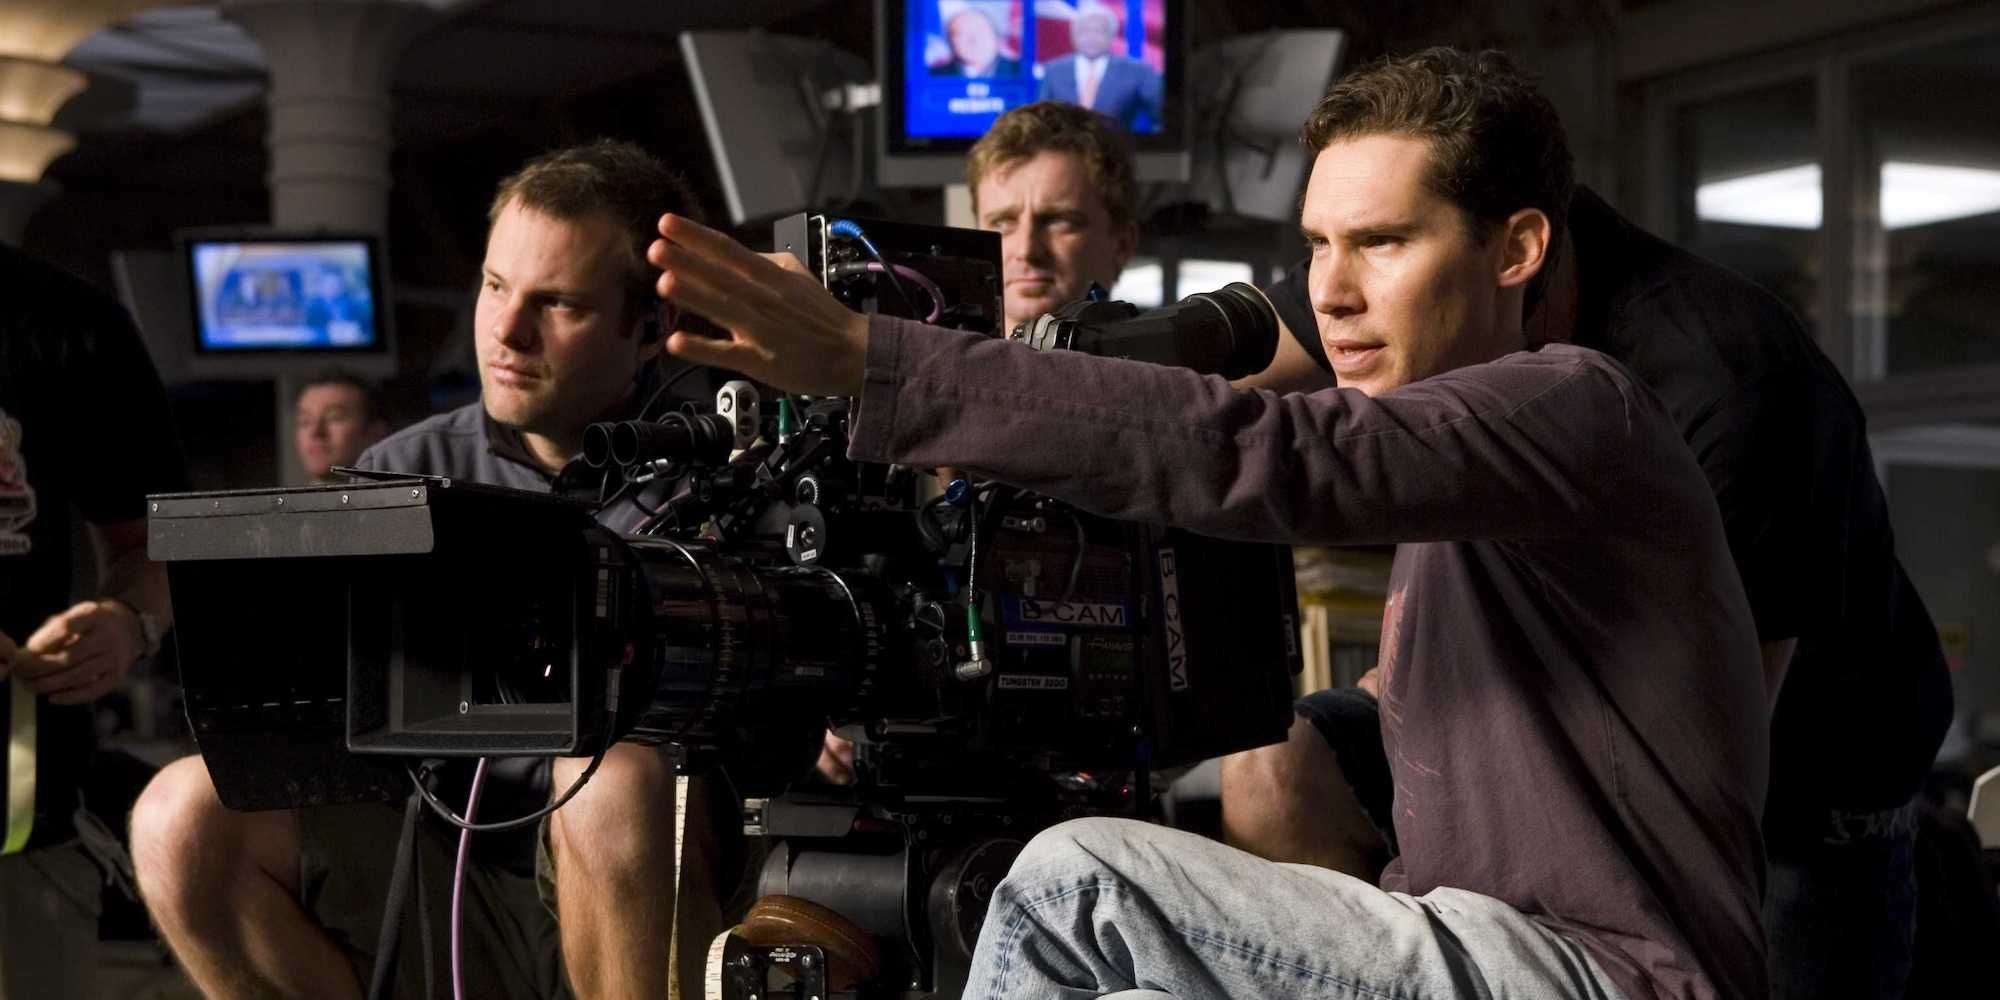 Bryan Singer Faces New Sexual Misconduct Allegations